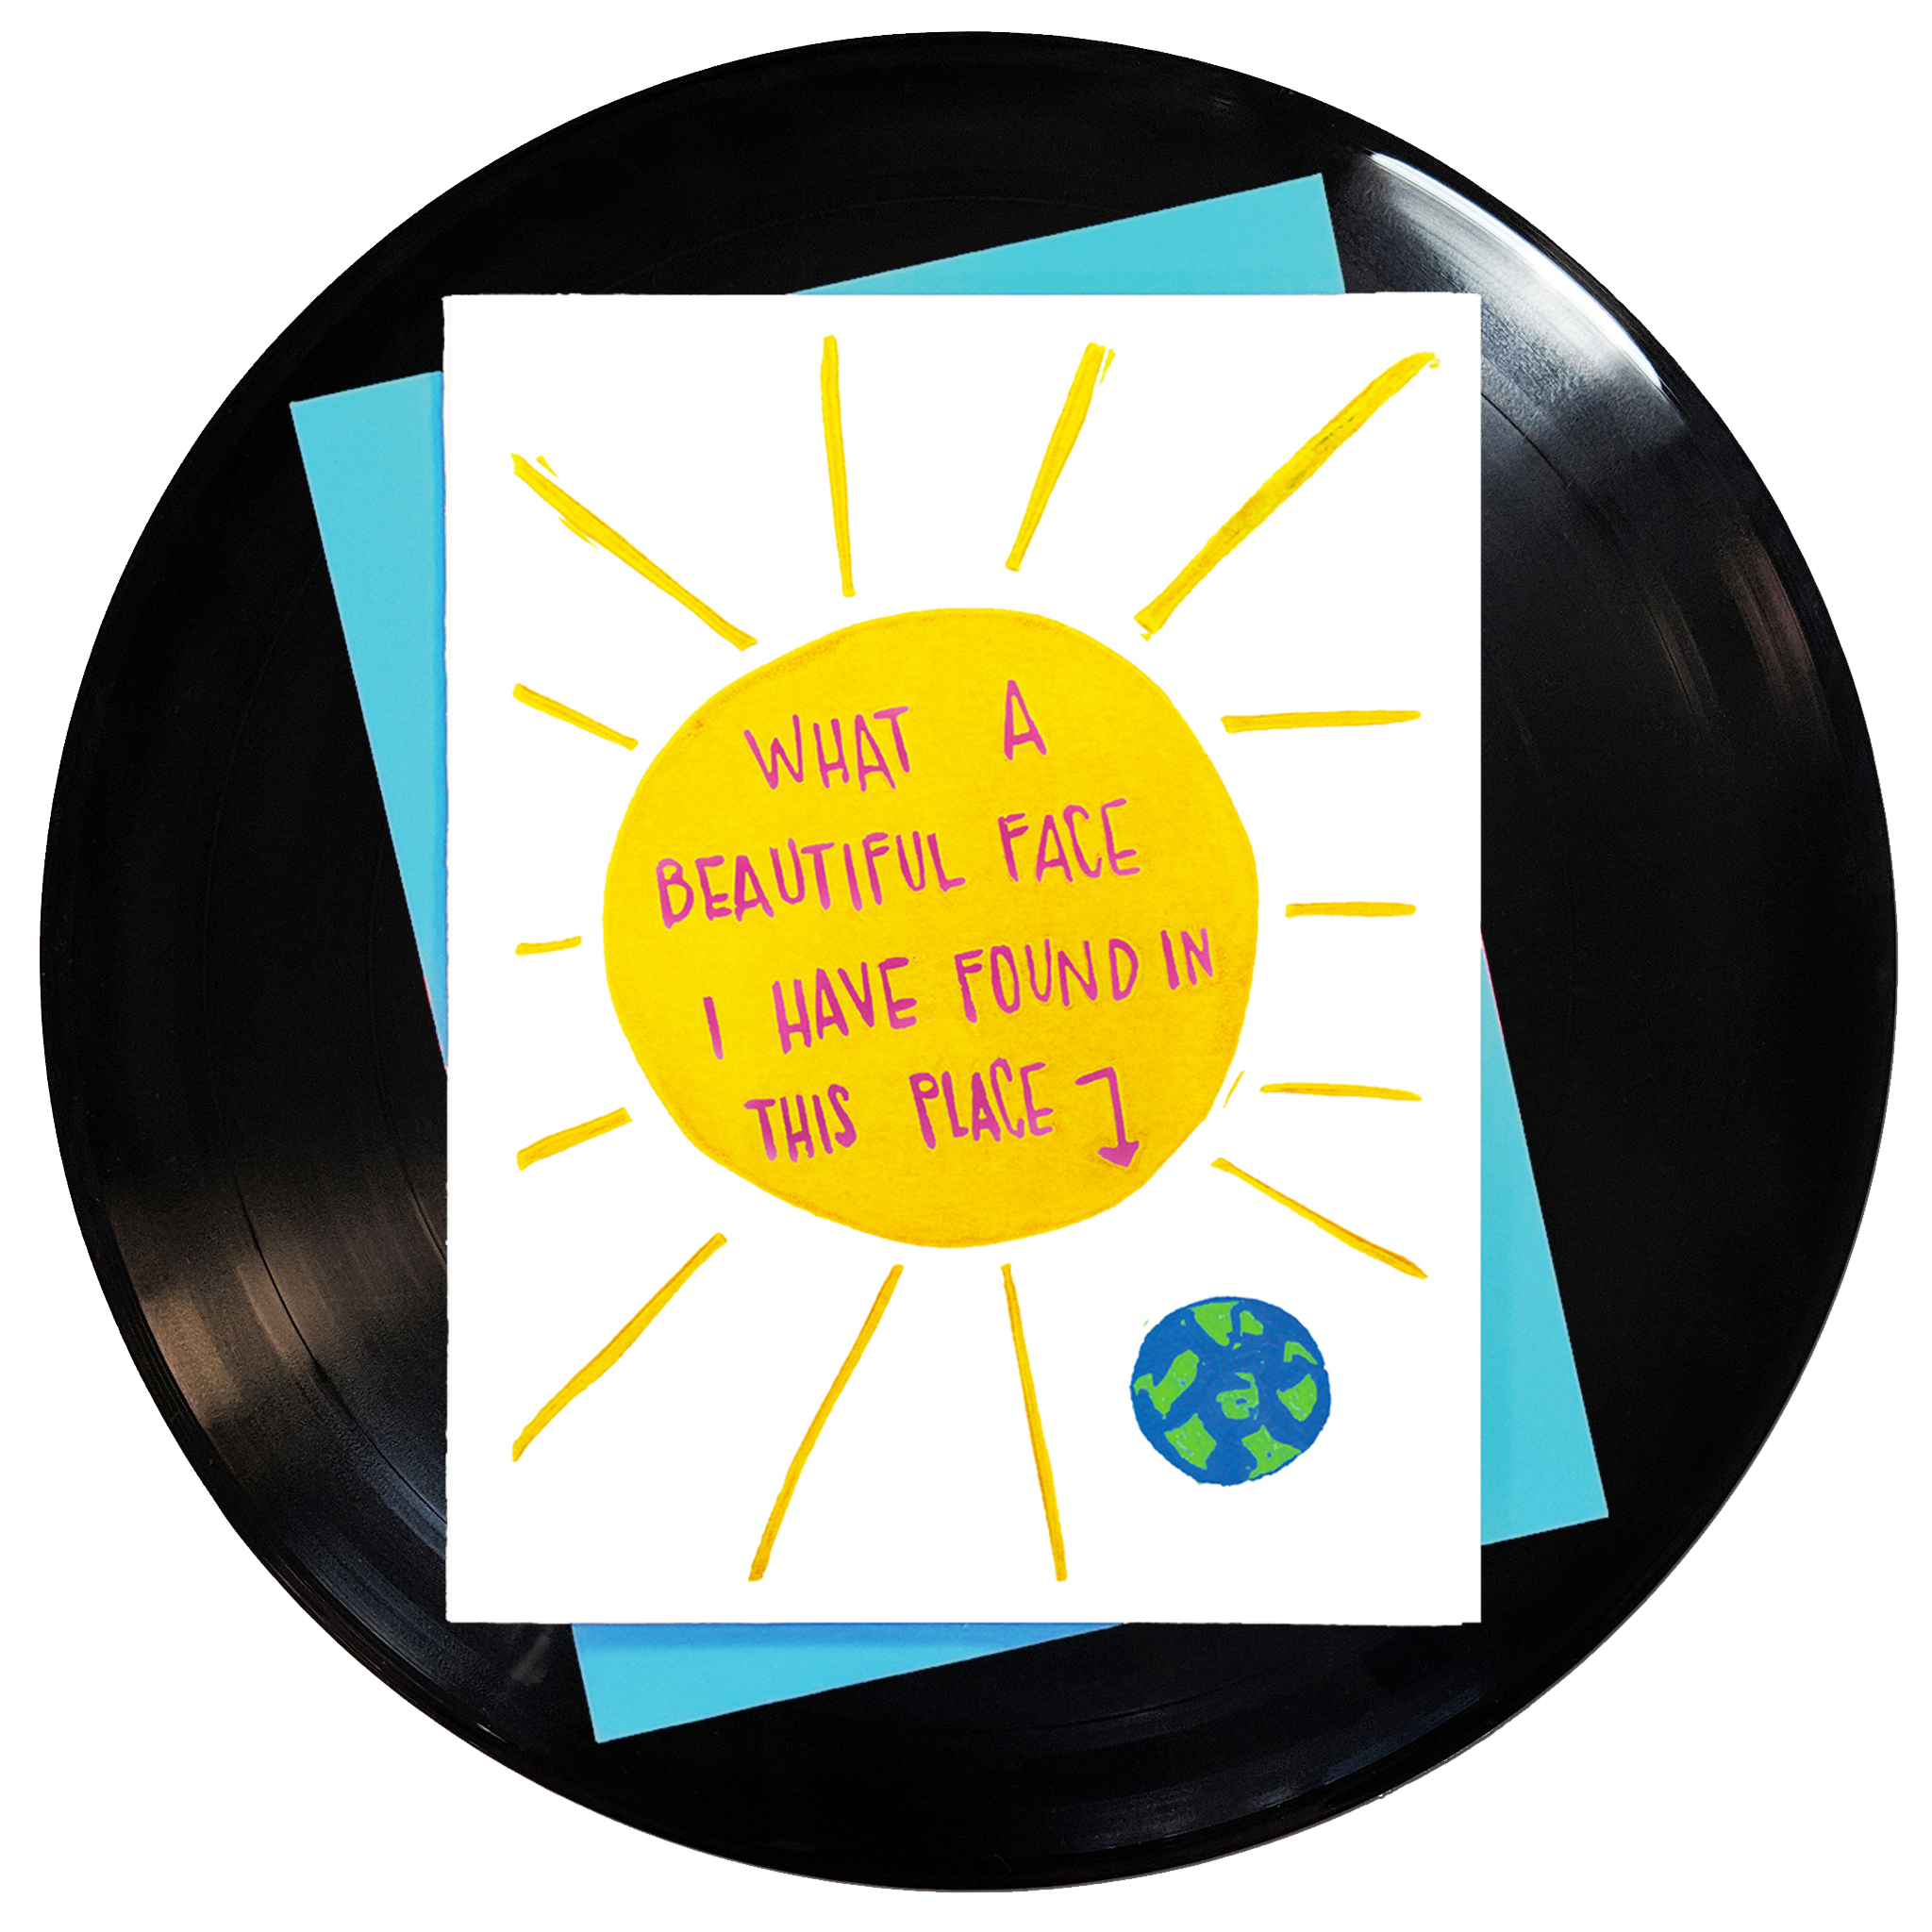 What A Beautiful Face Greeting Card 6-Pack Inspired By Music